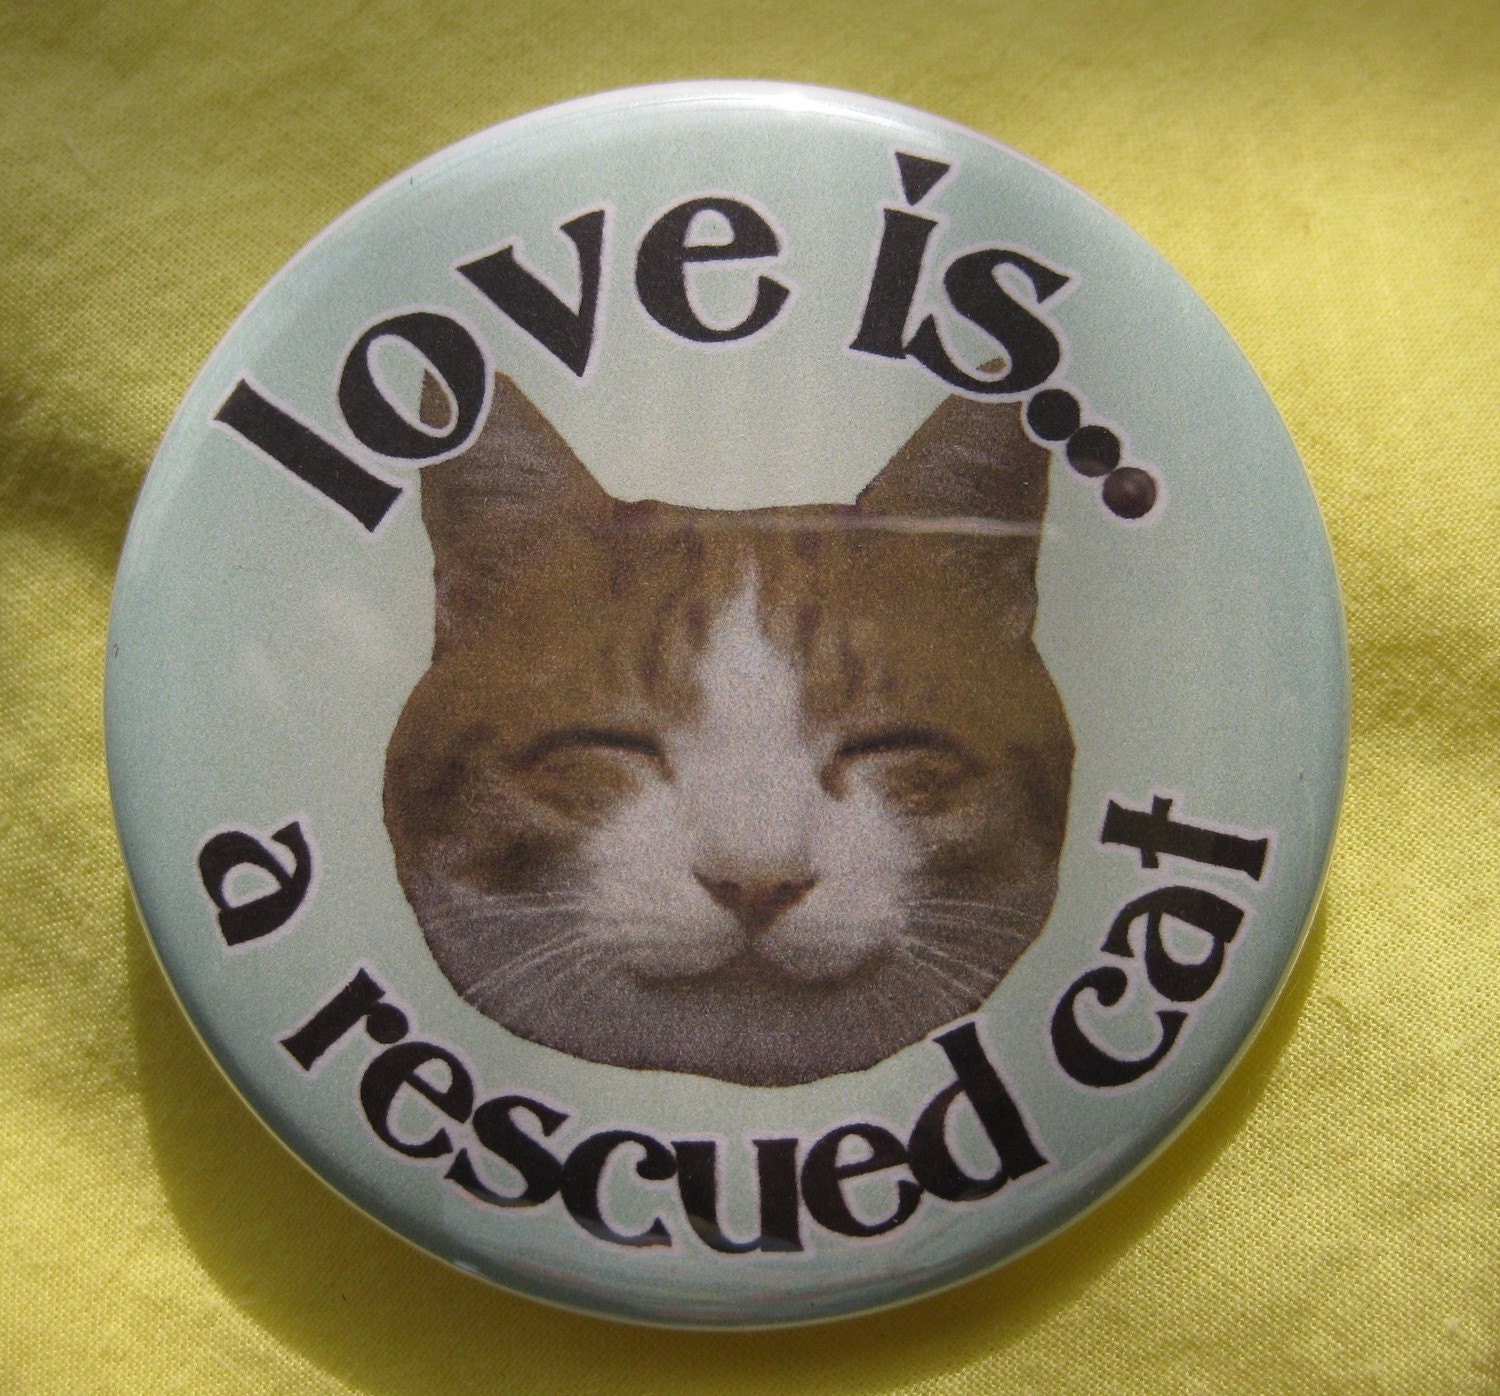 love is ... a rescued cat .... orange tabby ... badge